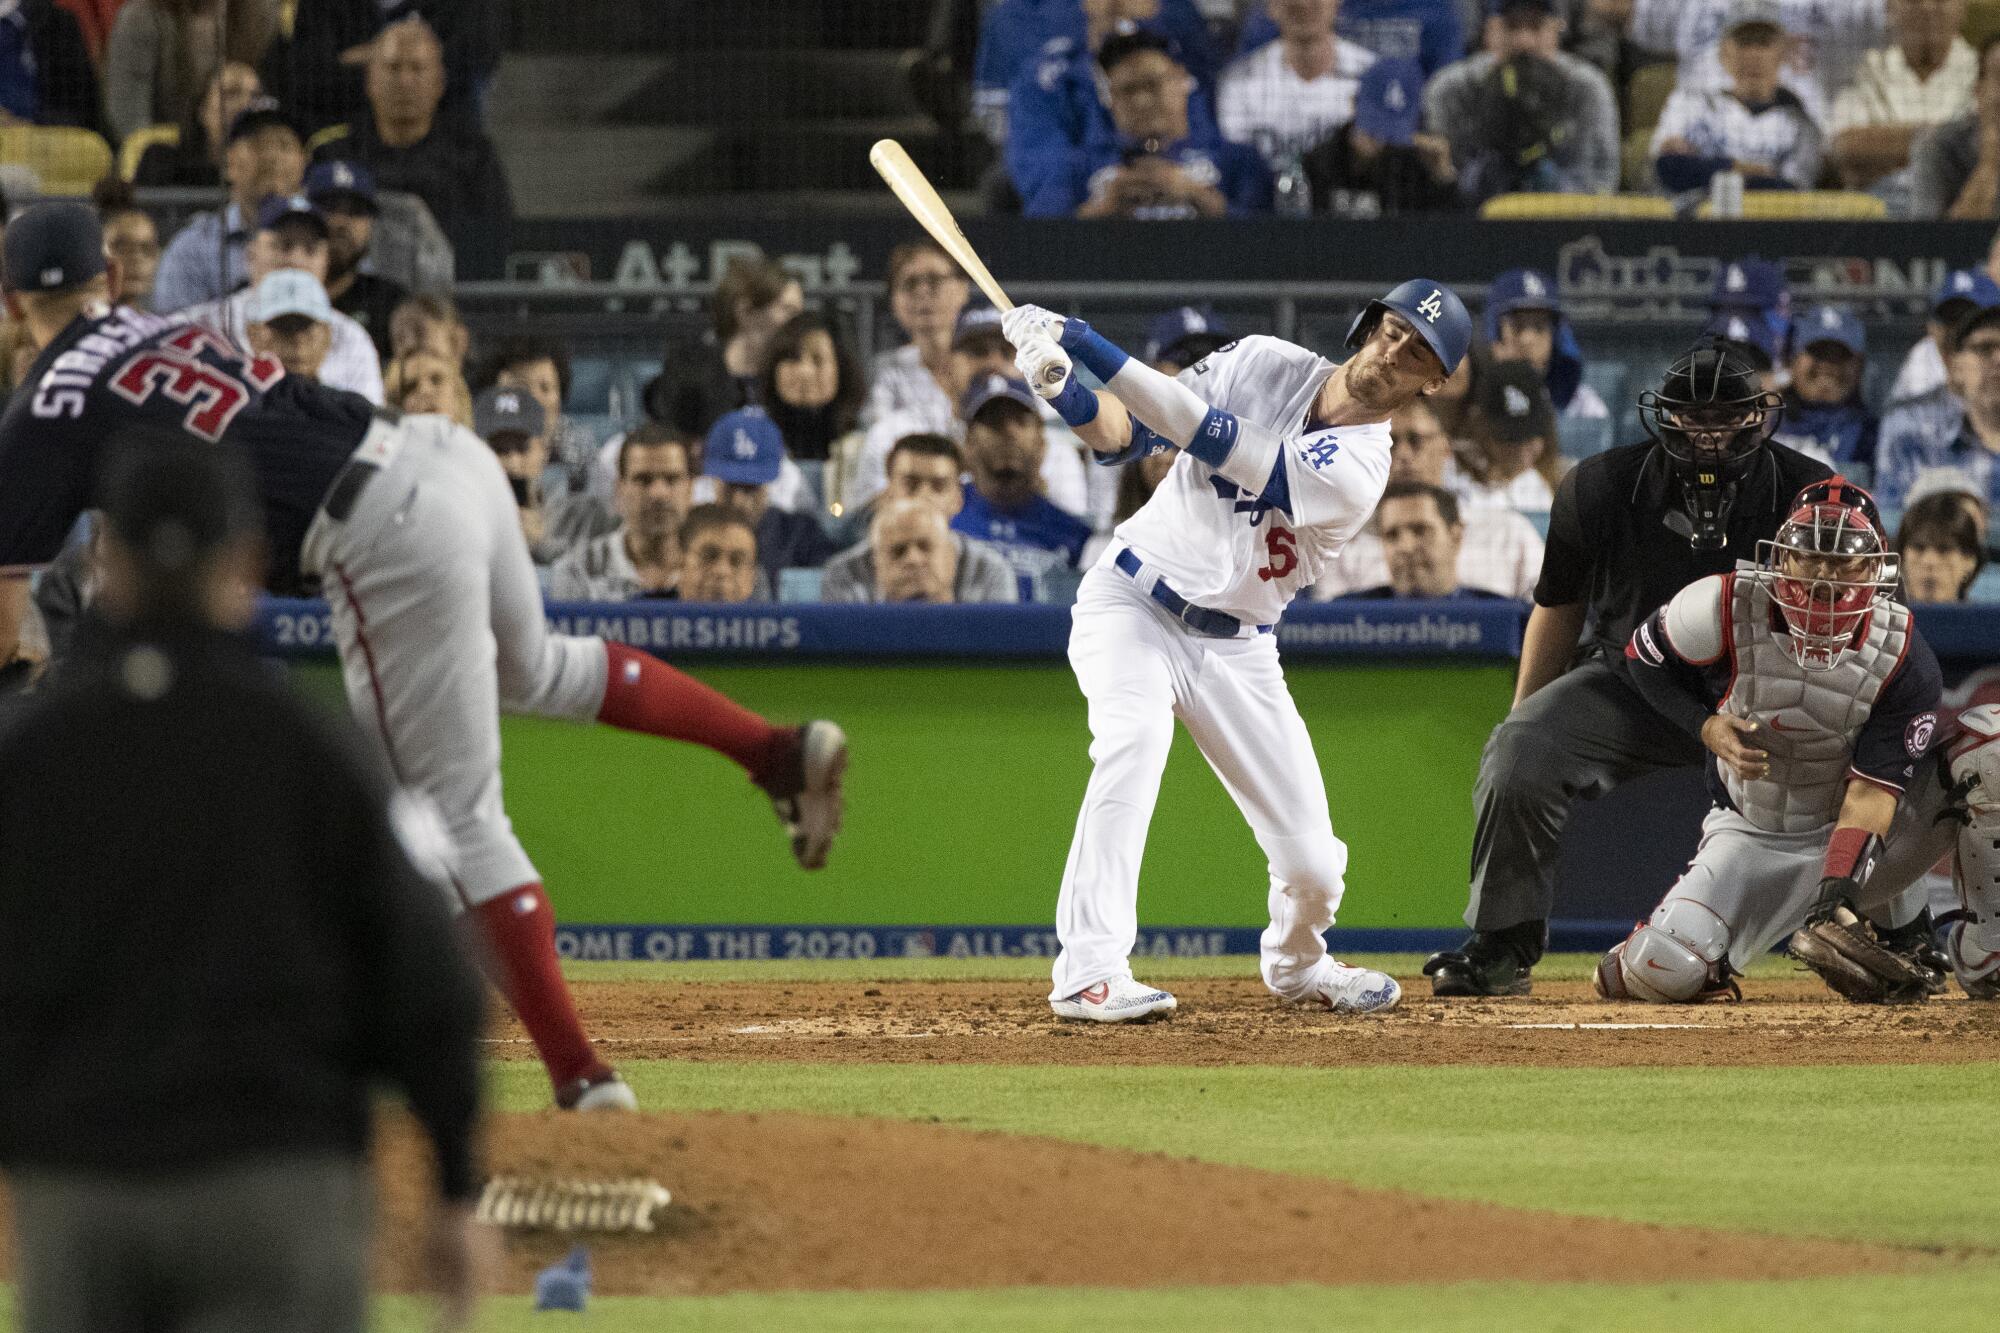 Washington Nationals starting pitcher Stephen Strasburg strikes out Dodgers center fielder Cody Bellinger during the fifth inning of the Dodgers' NLDS Game 2 loss Friday.